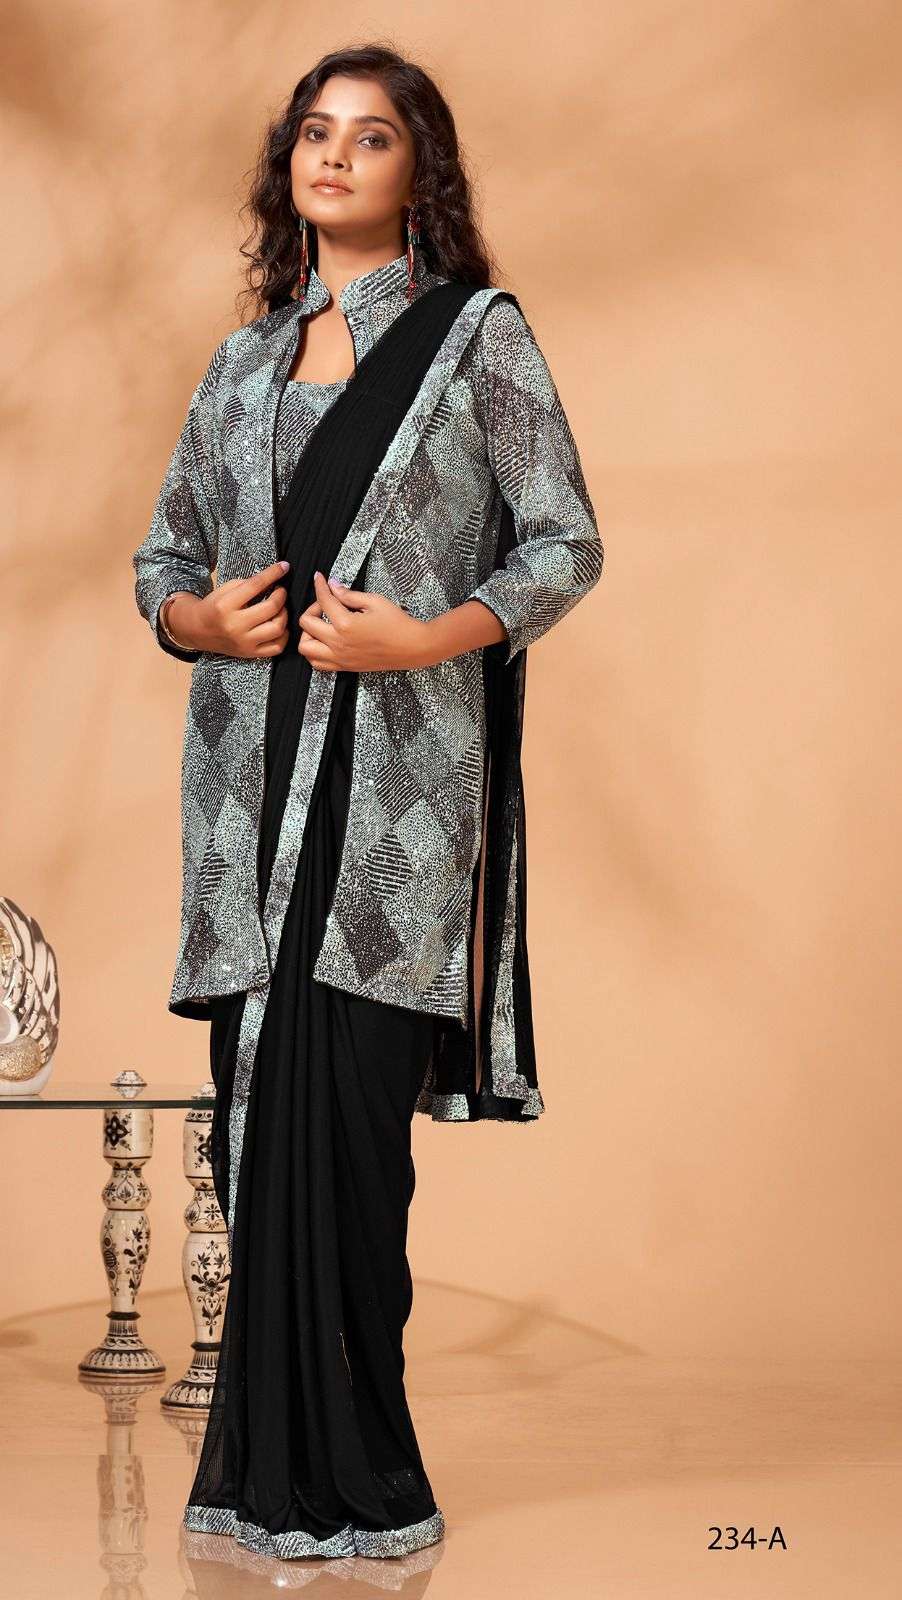 readymade saree design number a234 ready to wear saree with designer blouse and long jacket stylish partywear black colour ready to wear saree